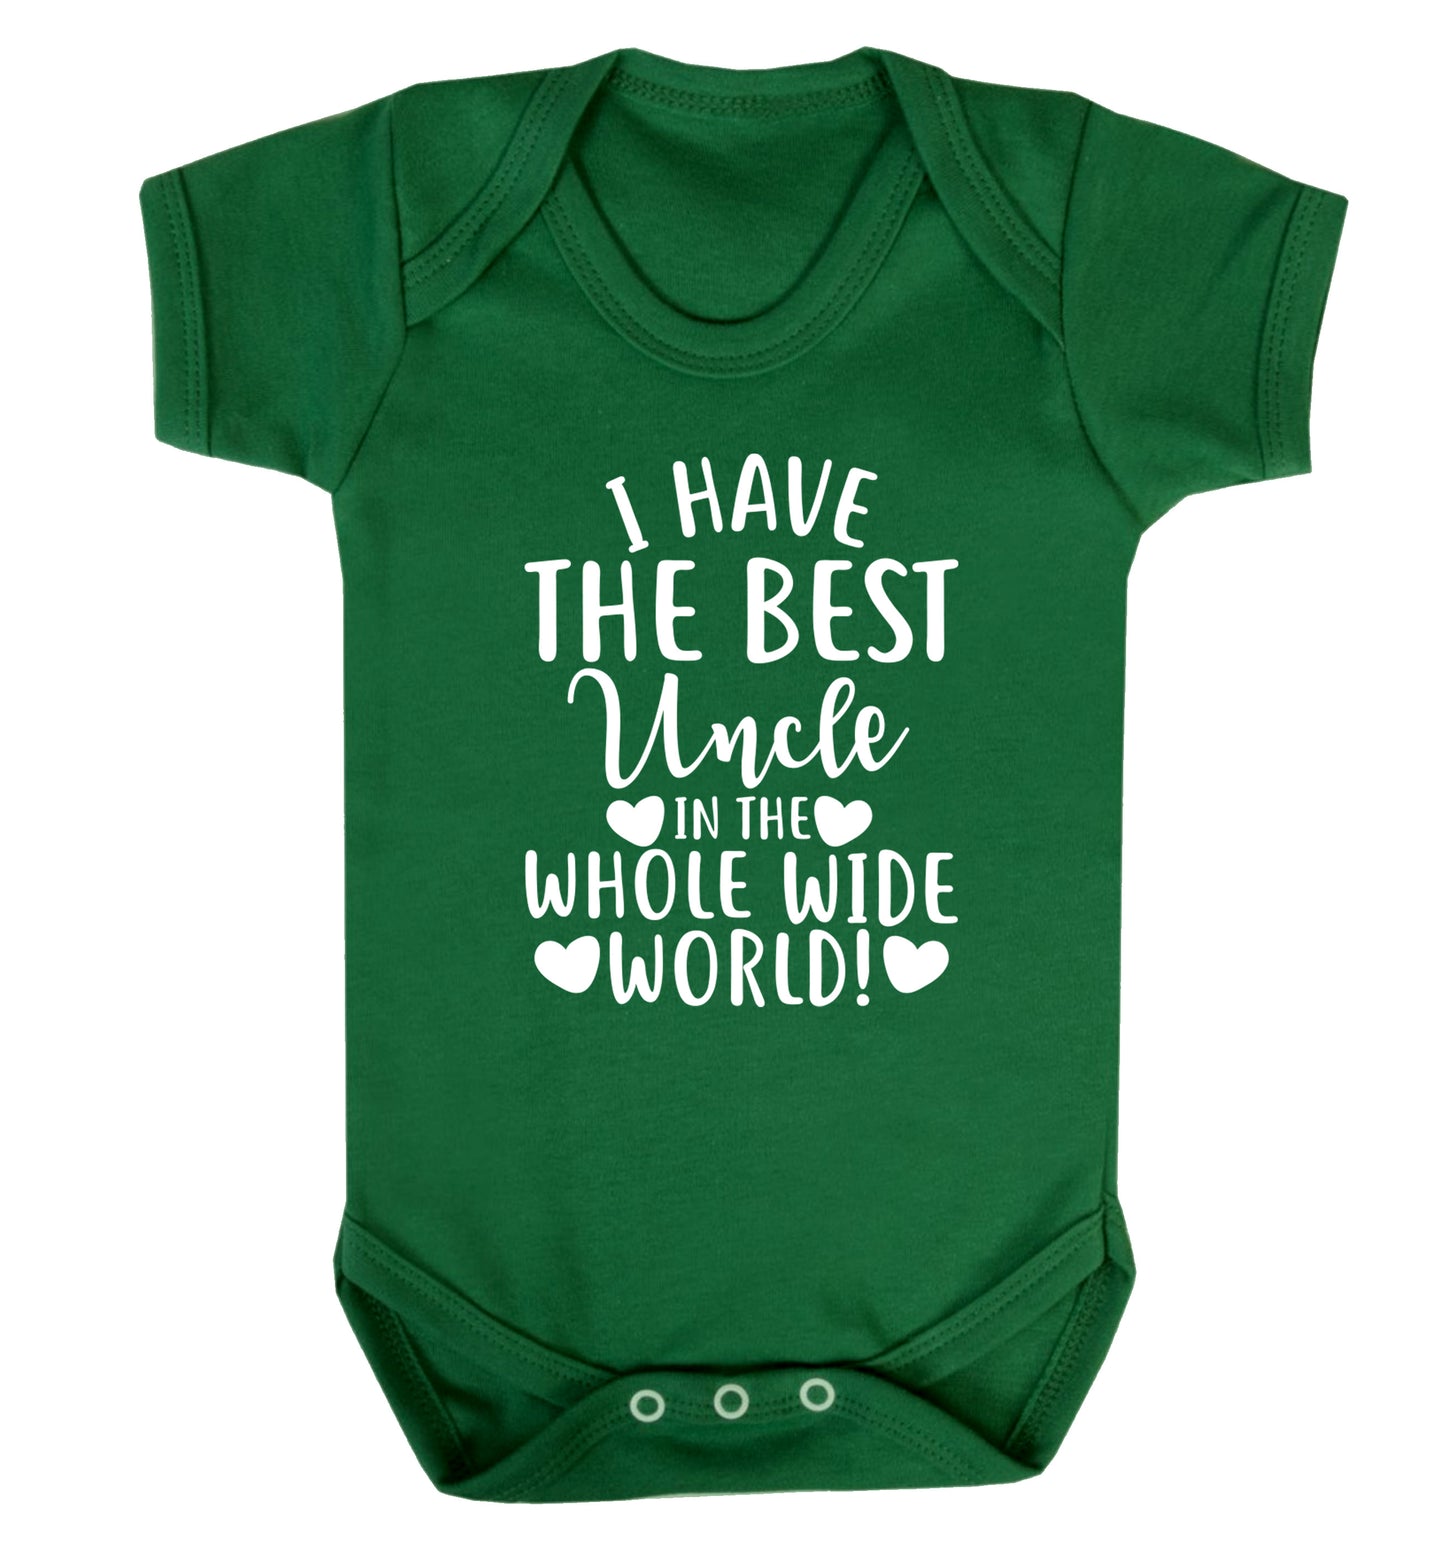 I have the best uncle in the whole wide world! Baby Vest green 18-24 months